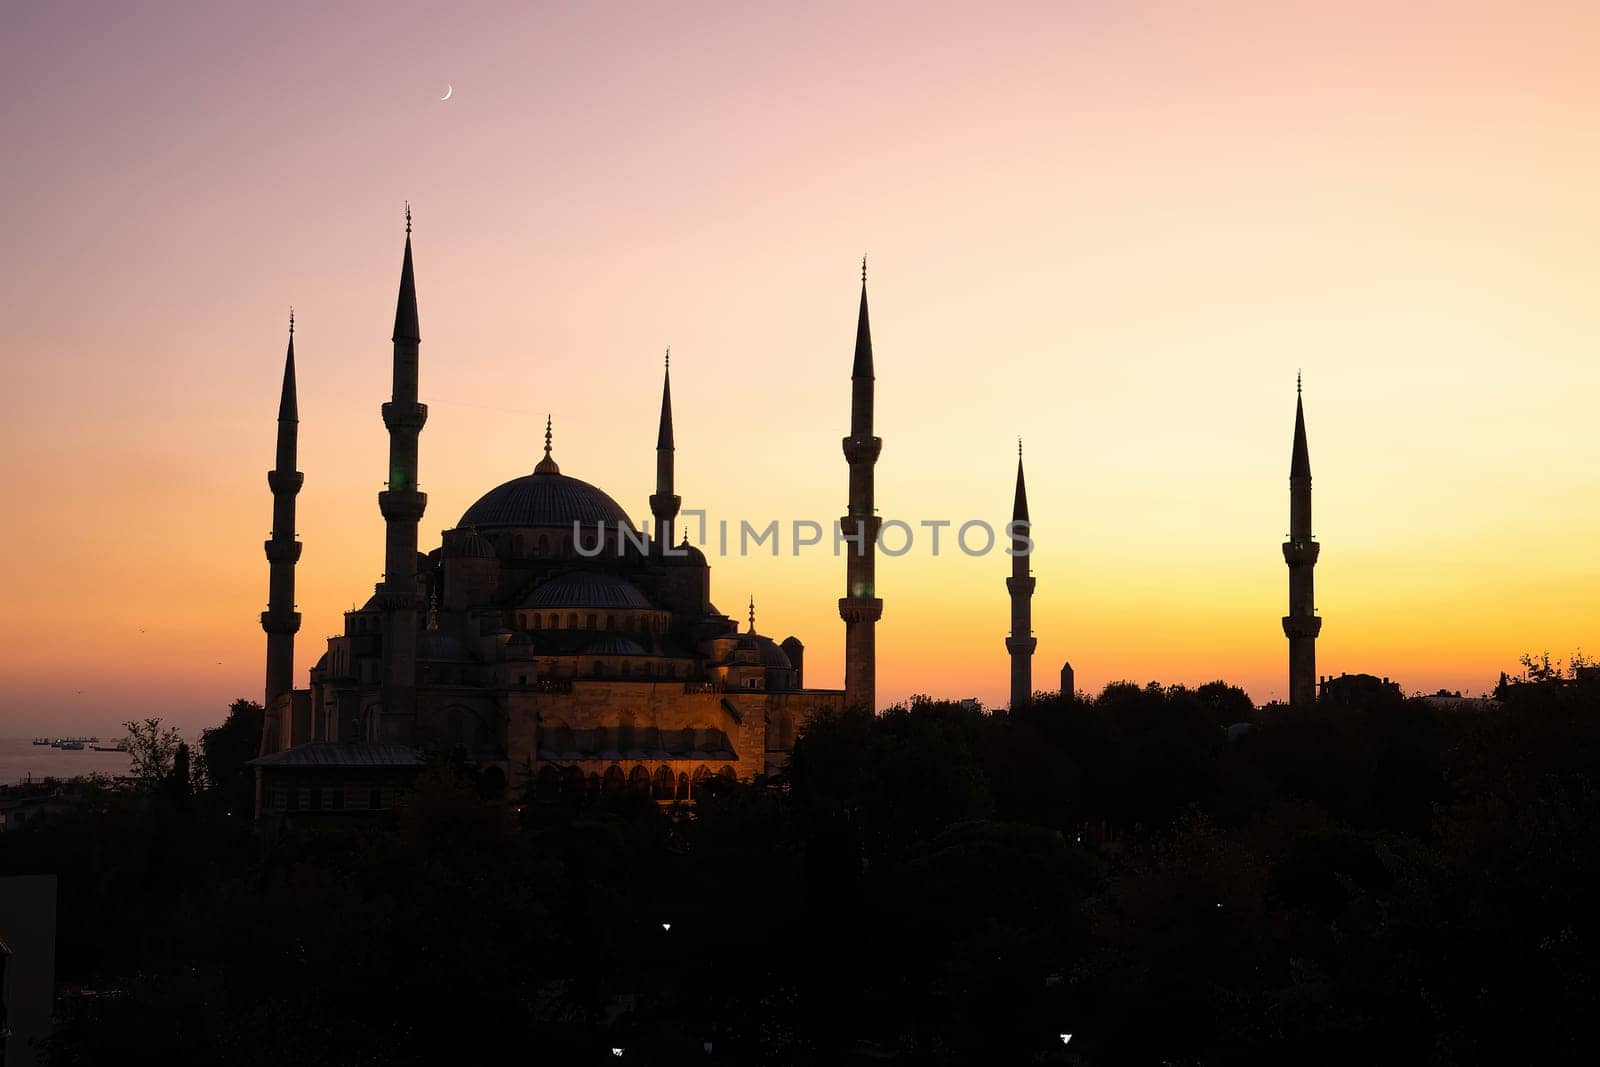 Silhouette shot of The Sultanahmet Mosque (Blue Mosque) in Istanbul, Turkey at sunset